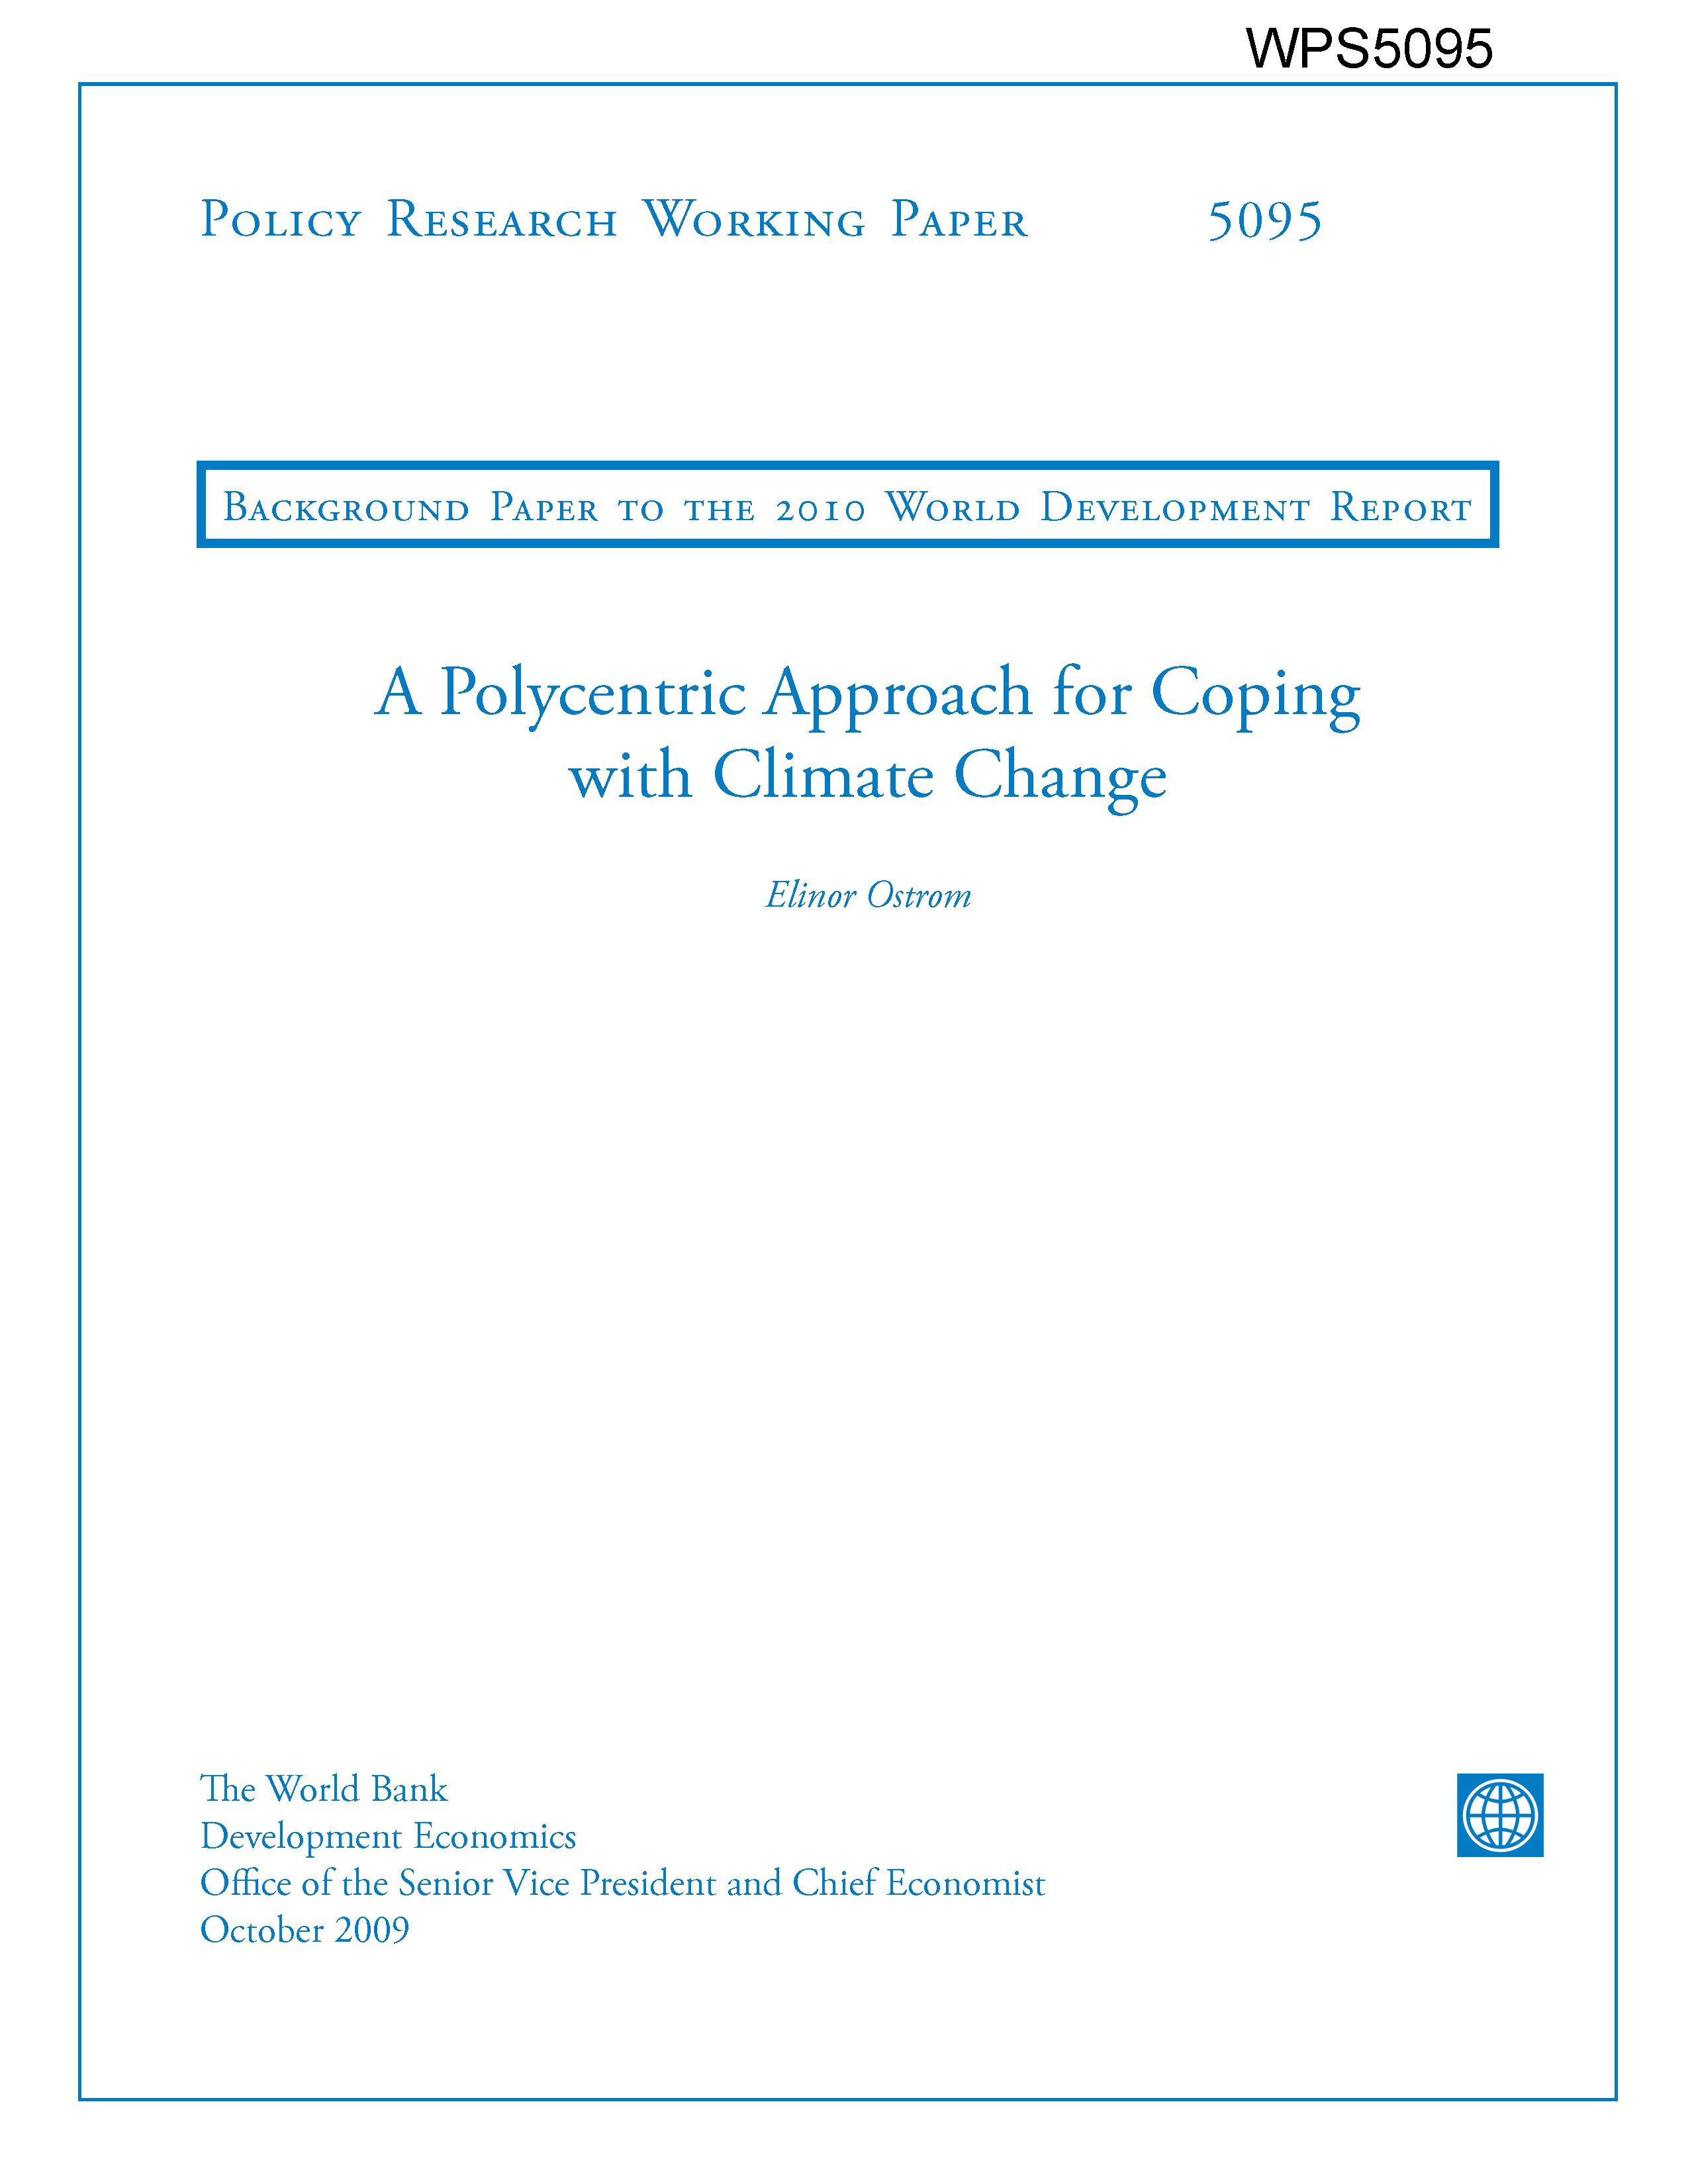 Cover page for A Polycentric Approach for Coping with Climate Change